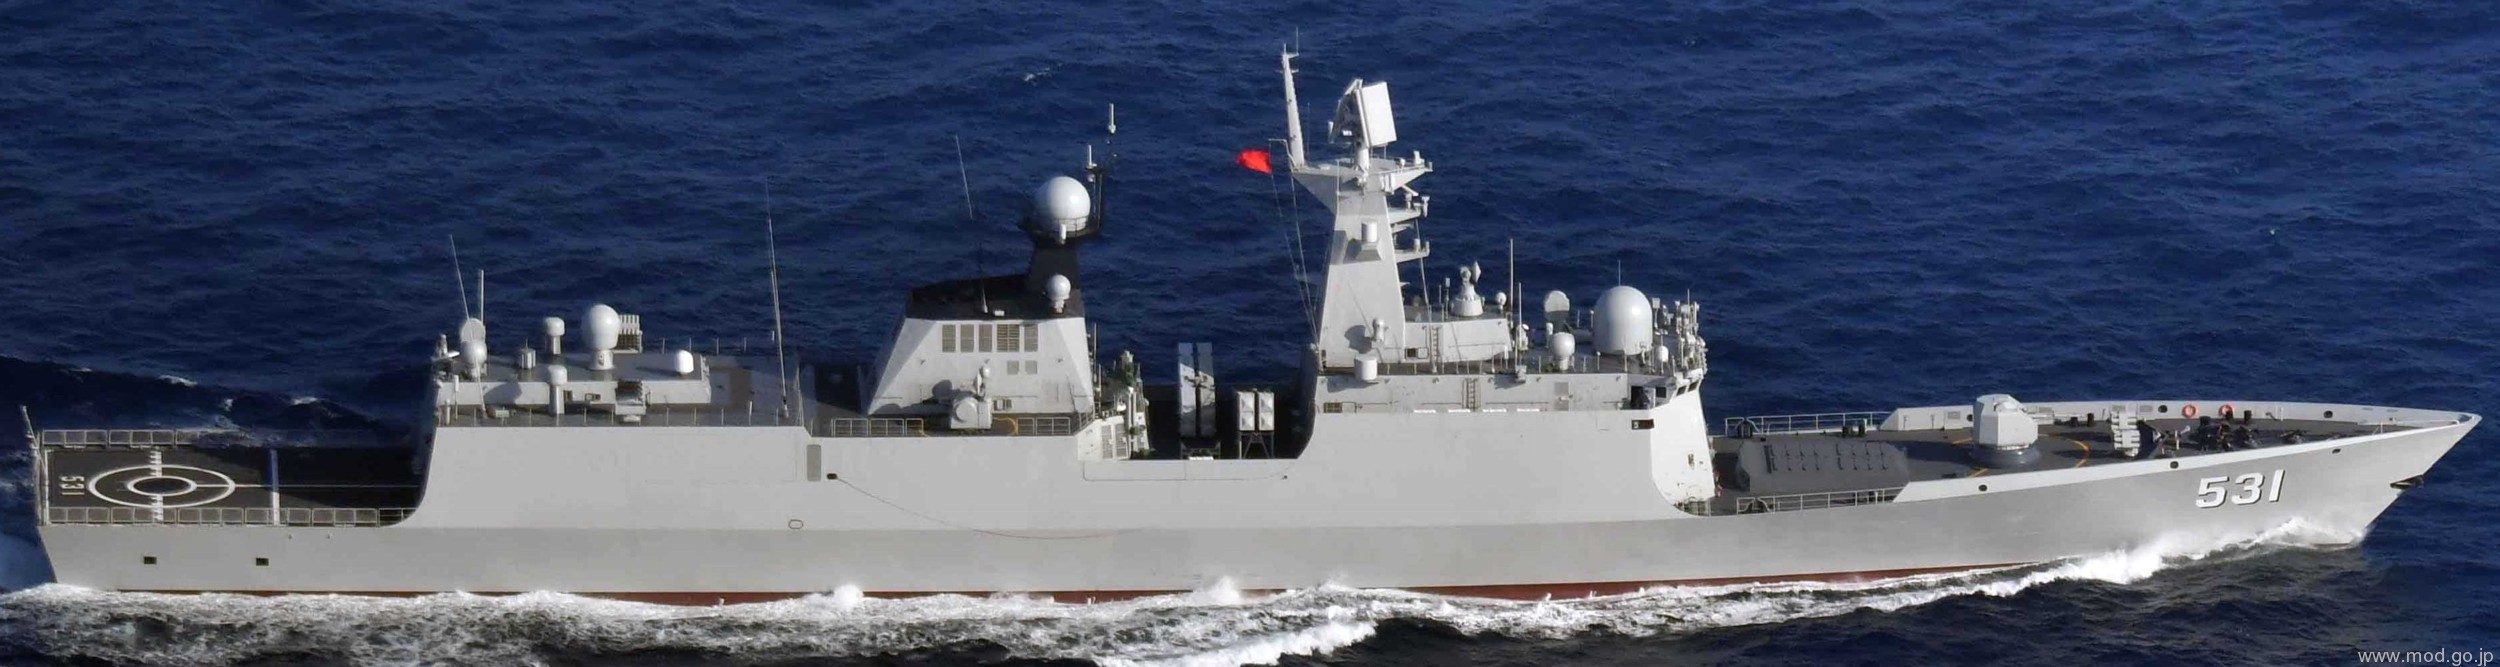 ffg-531 plans xiangtan type 054a jiangkai ii class guided missile frigate china people's liberation army navy 02